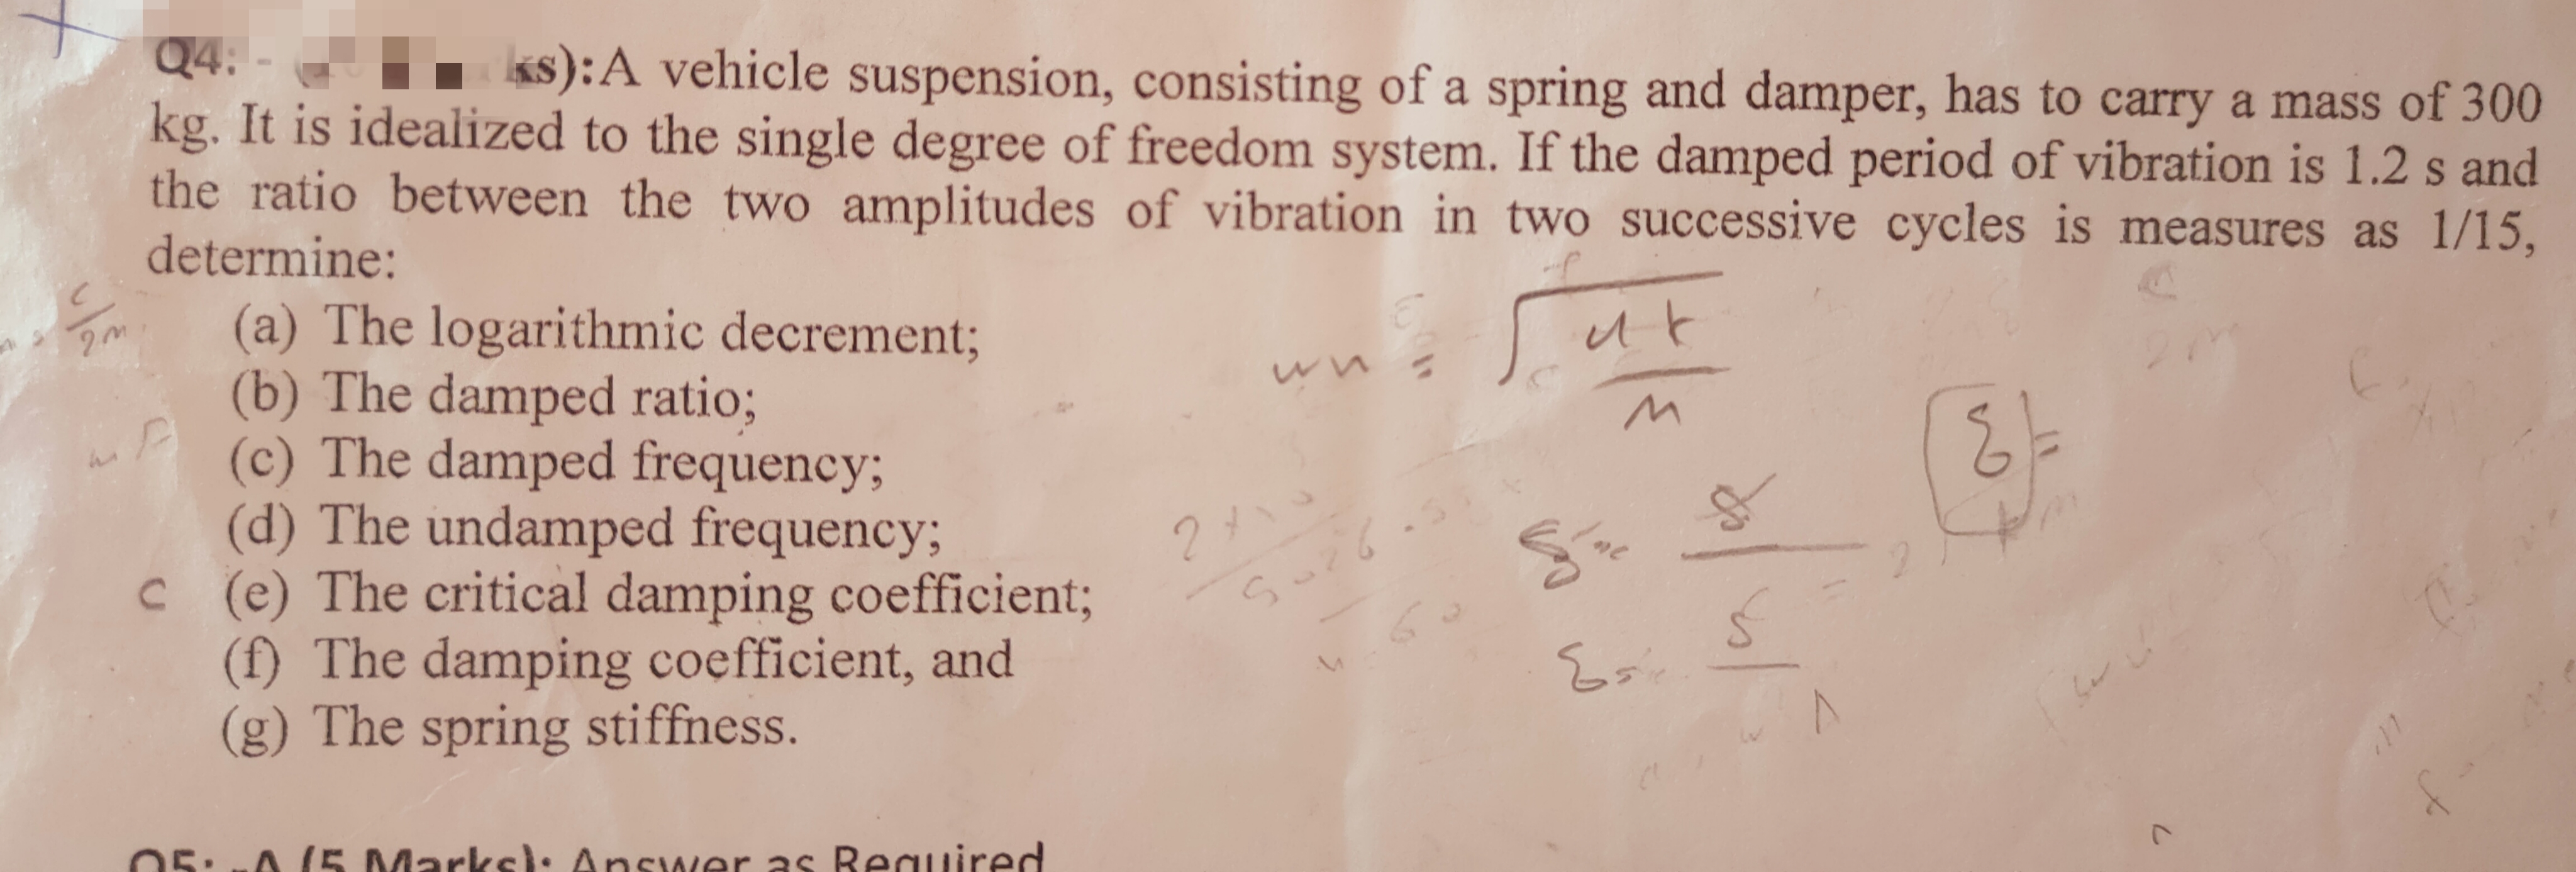 20
Q4: -
ks): A vehicle suspension, consisting of a spring and damper, has to carry a mass of 300
kg. It is idealized to the single degree of freedom system. If the damped period of vibration is 1.2 s and
the ratio between the two amplitudes of vibration in two successive cycles is measures as 1/15,
determine:
니다
MP
(a) The logarithmic decrement;
(b) The damped ratio;
(c) The damped frequency;
(d) The undamped frequency;
с
(e) The critical damping coefficient;
(f) The damping coefficient, and
(g) The spring stiffness.
05:-/5 Marks): Answer as Required
10لا2
5.26.
S
/ne
Esi
vol
E
ber
L
0
f